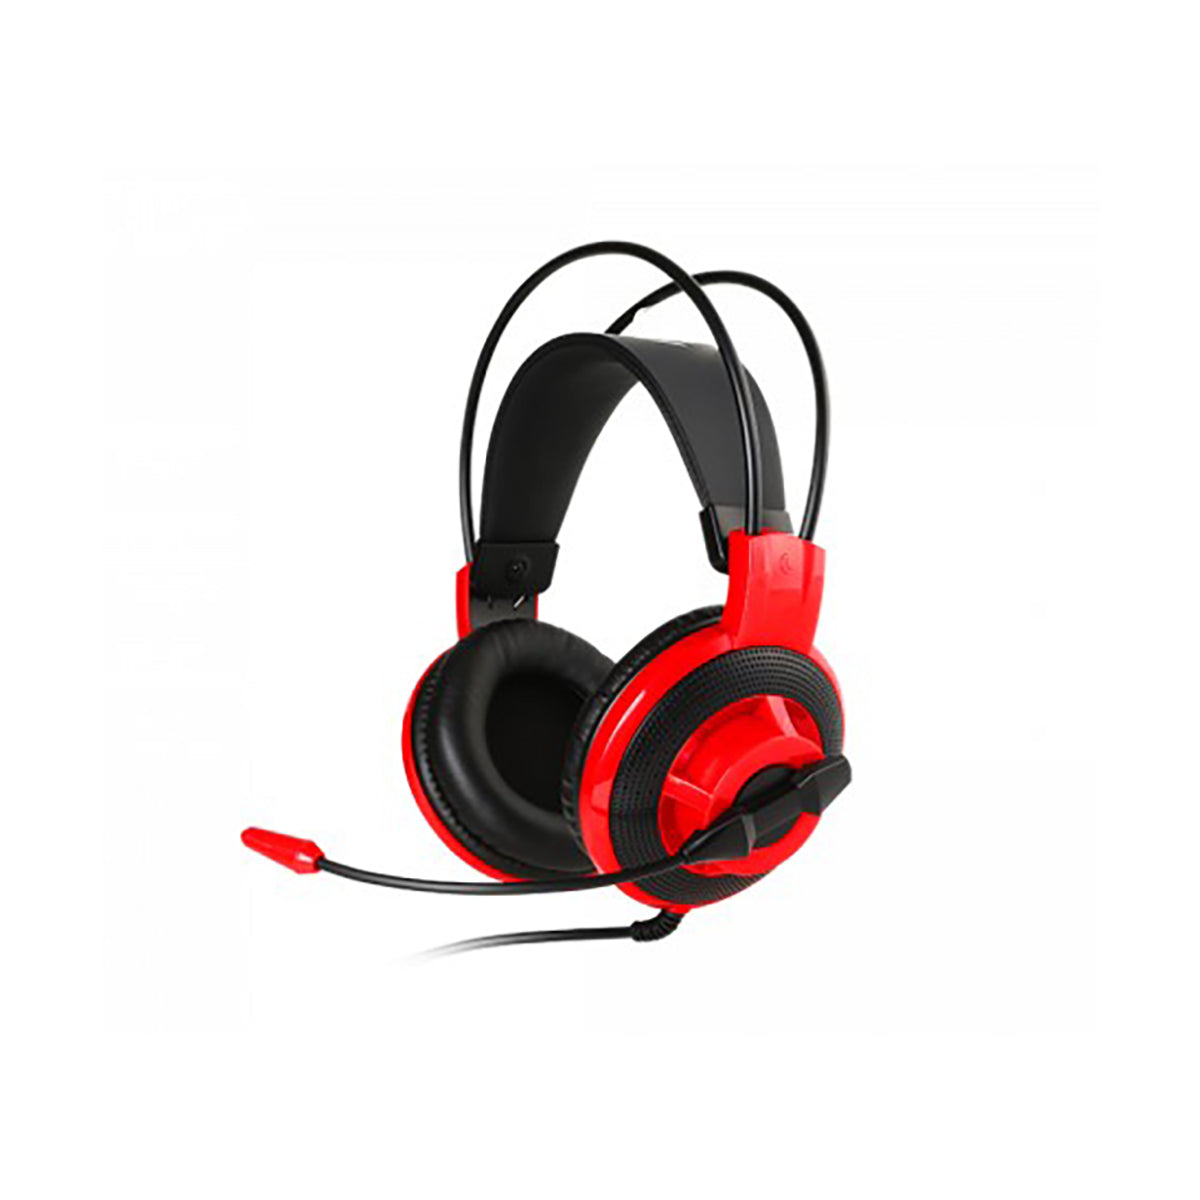 AURICULARES MSI DS501 GAMING HEADSET NEGRO INTERFAZ 3.5MM